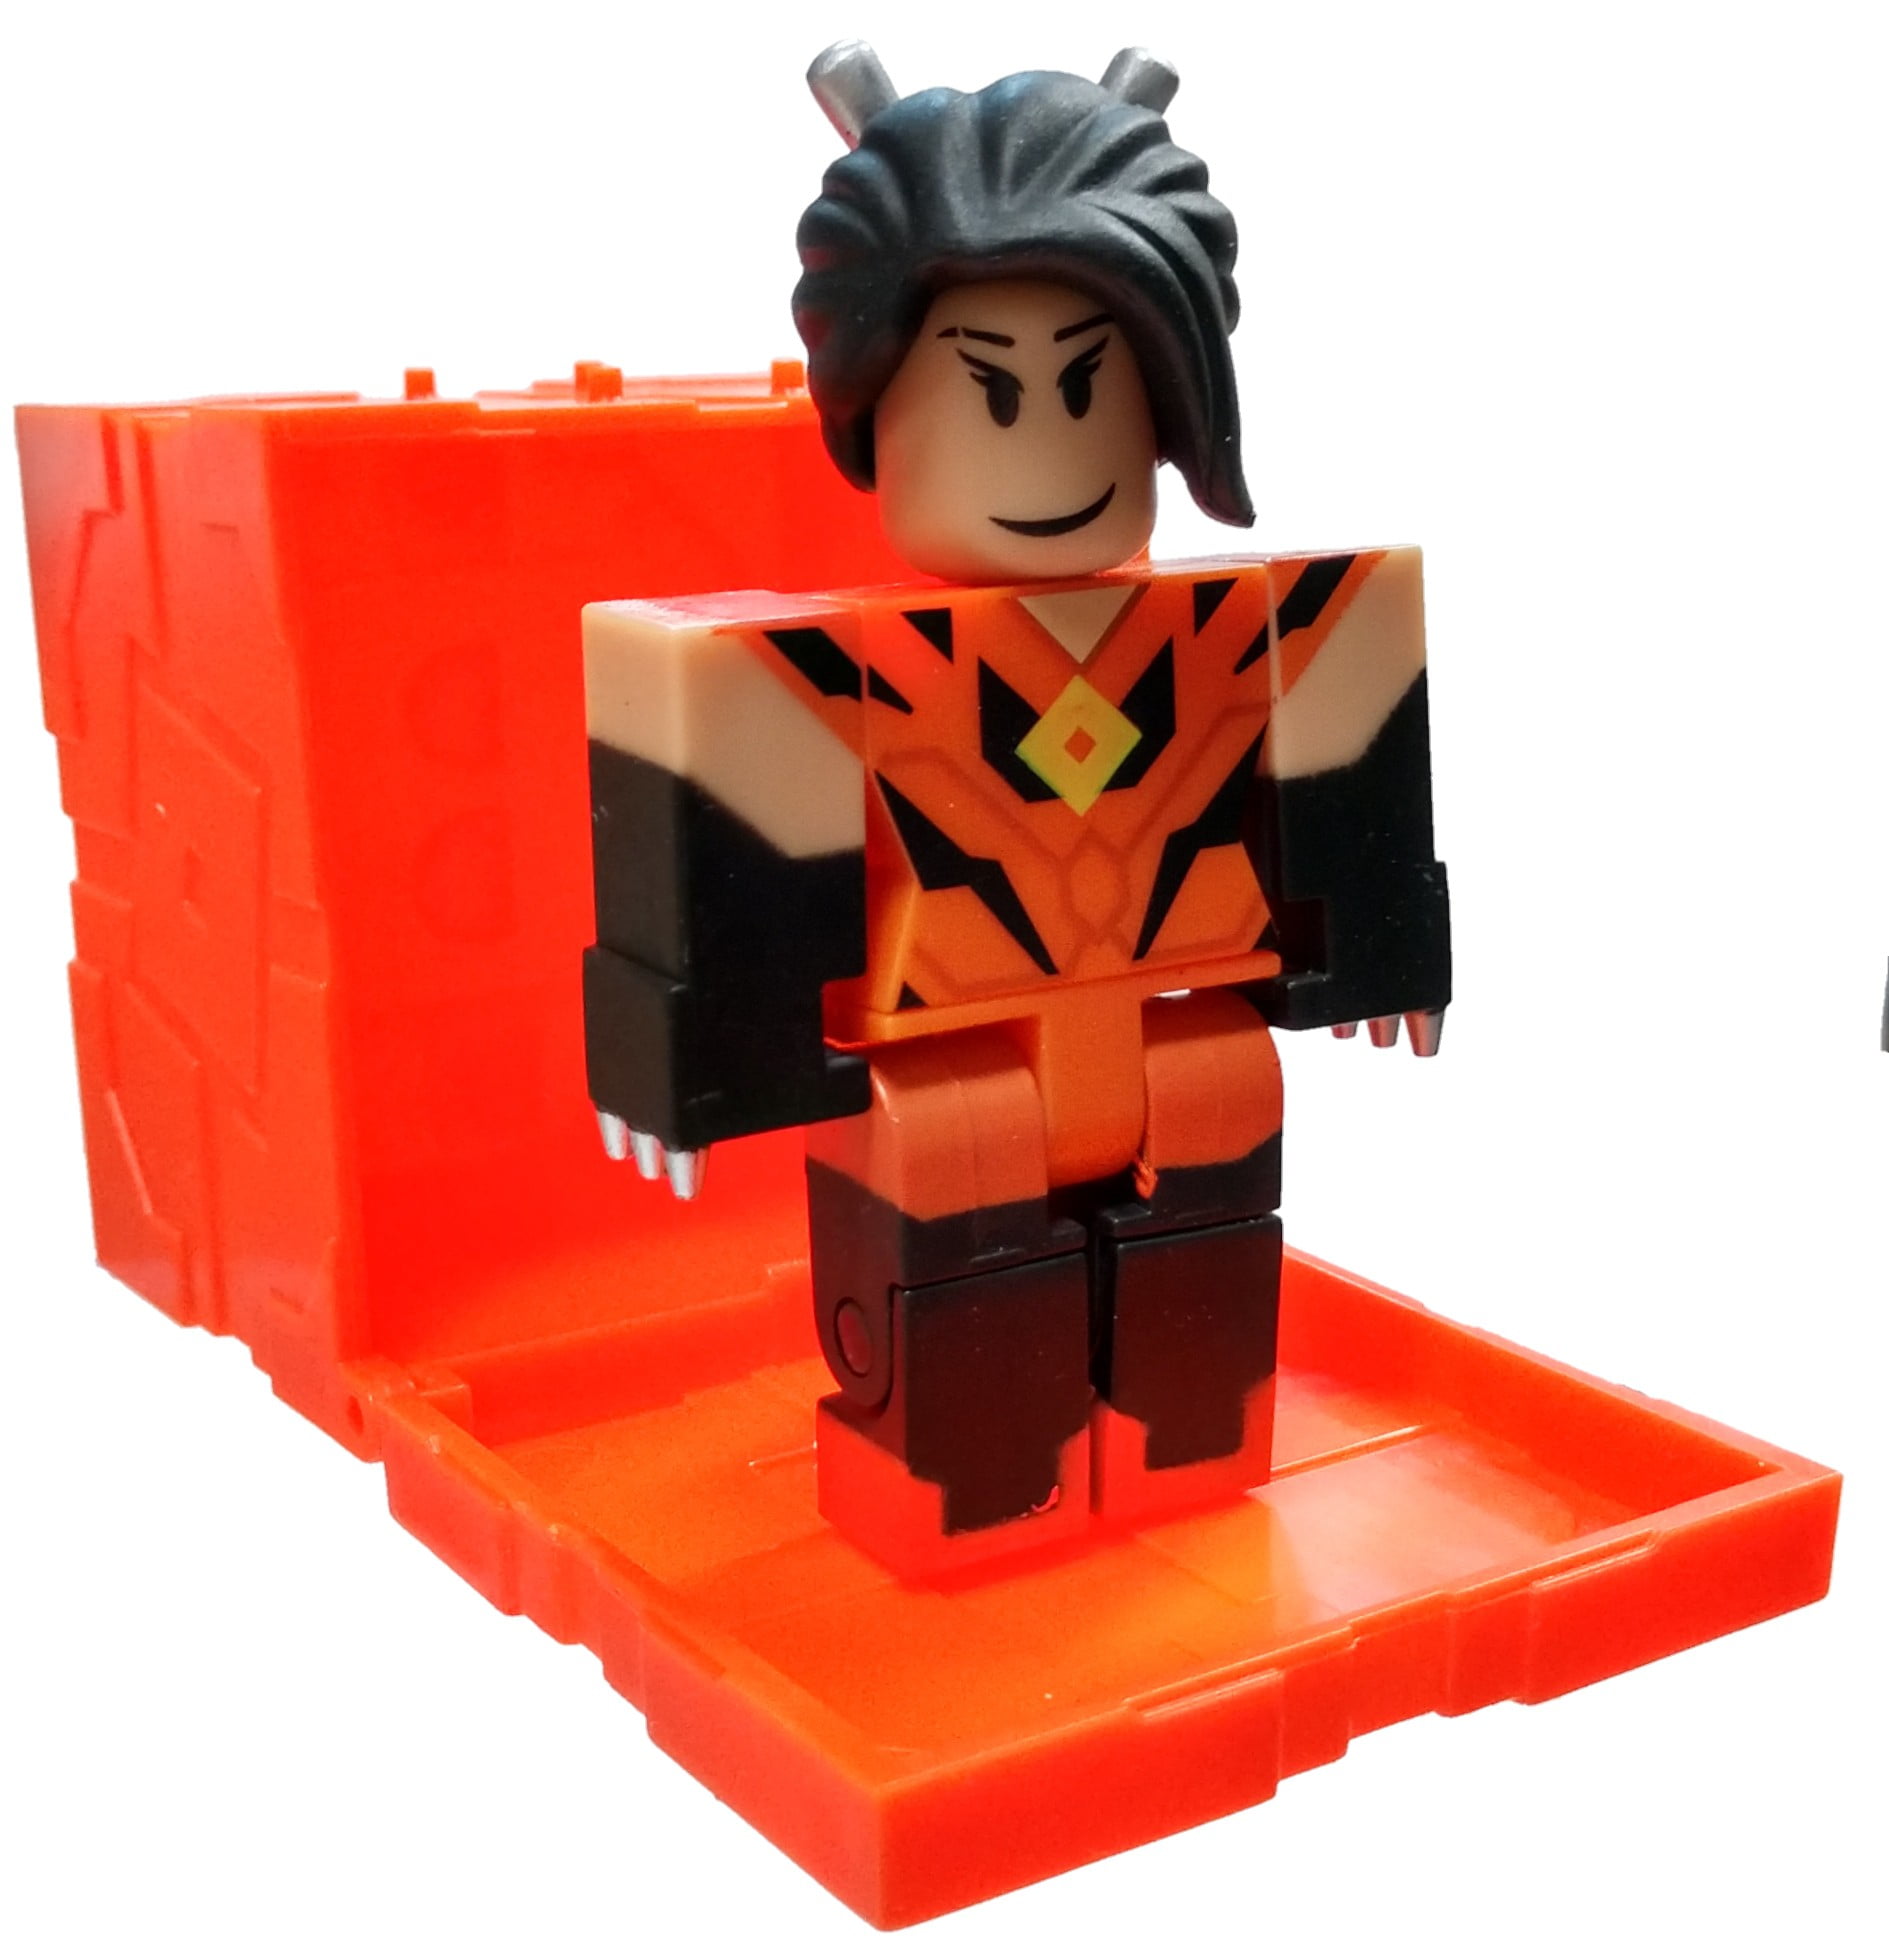 Series 6 Heroes Of Robloxia Tigris Mini Figure With Orange Cube And Online Code No Packaging Walmart Com Walmart Com - pictures of robloxia